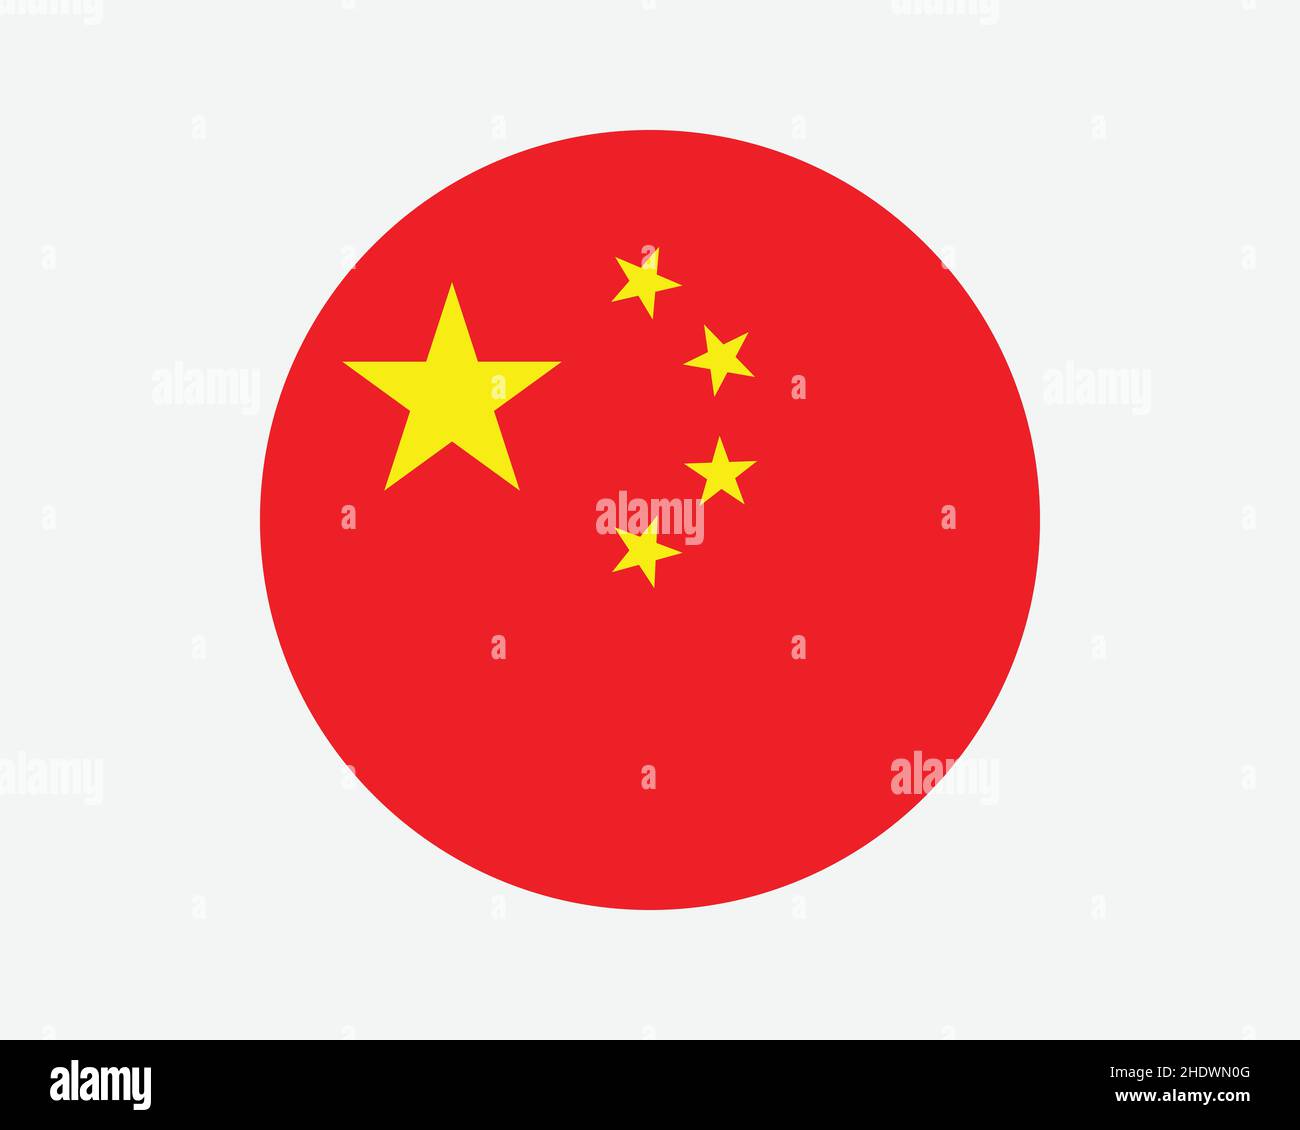 China Round Country Flag. Circular Chinese National Flag. People's Republic of China Circle Shape Button Banner. EPS Vector Illustration. Stock Vector